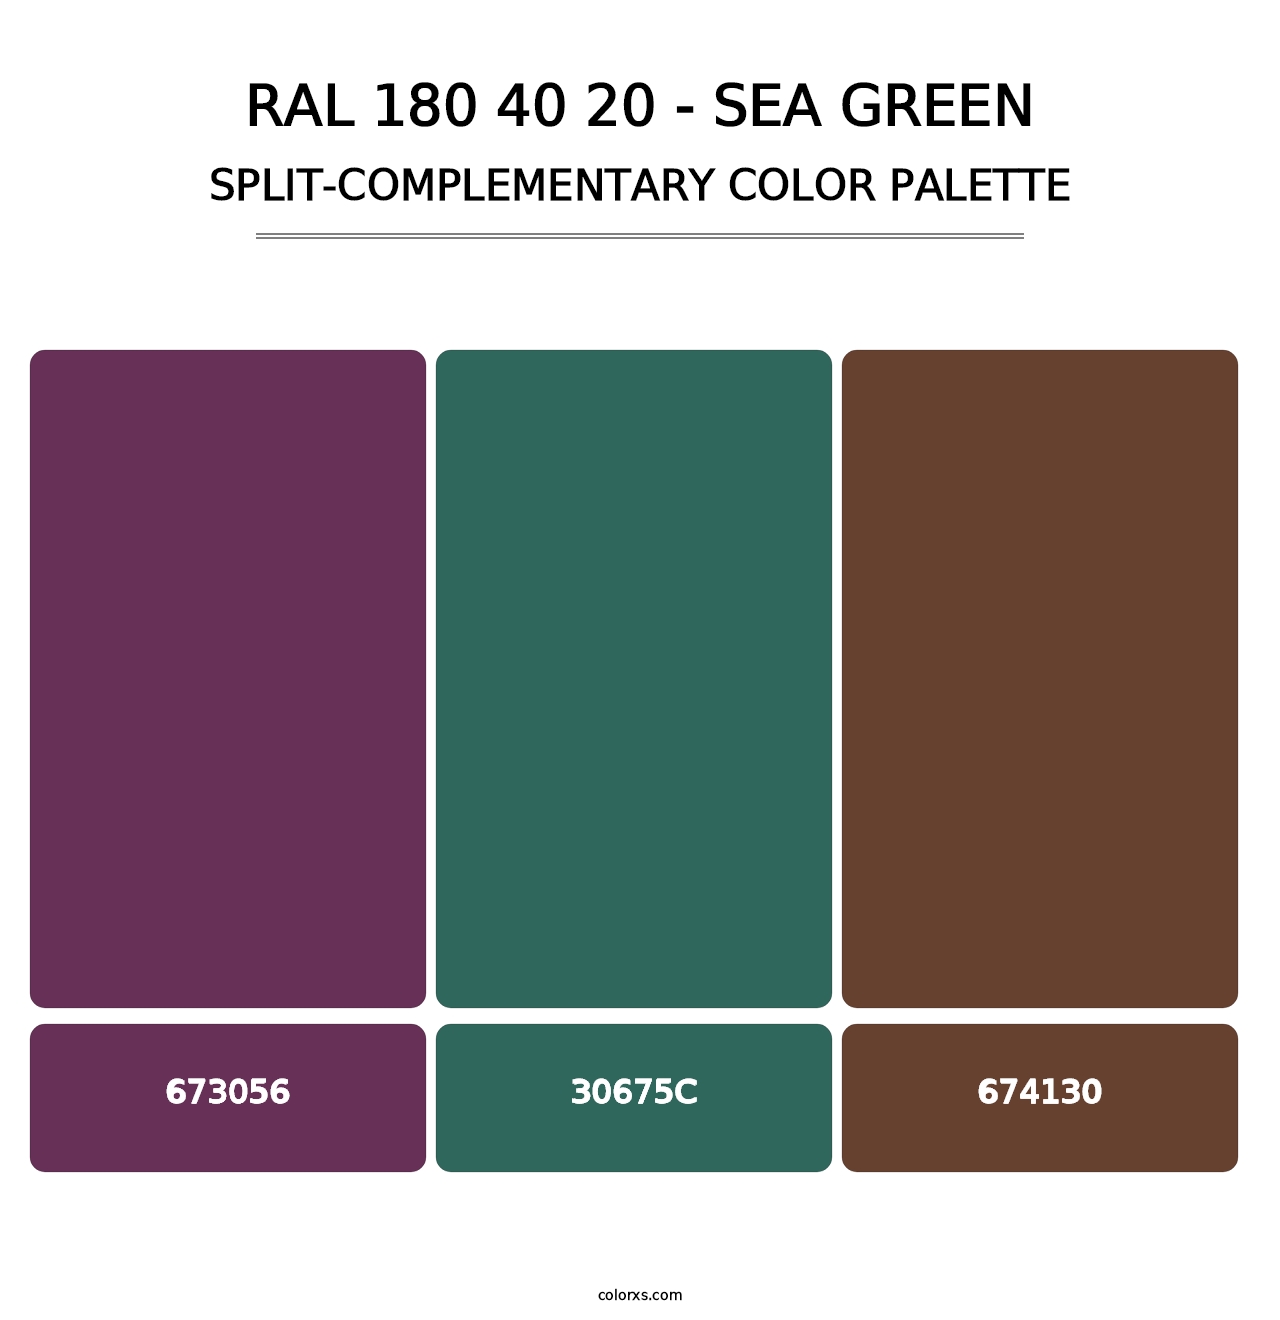 RAL 180 40 20 - Sea Green - Split-Complementary Color Palette